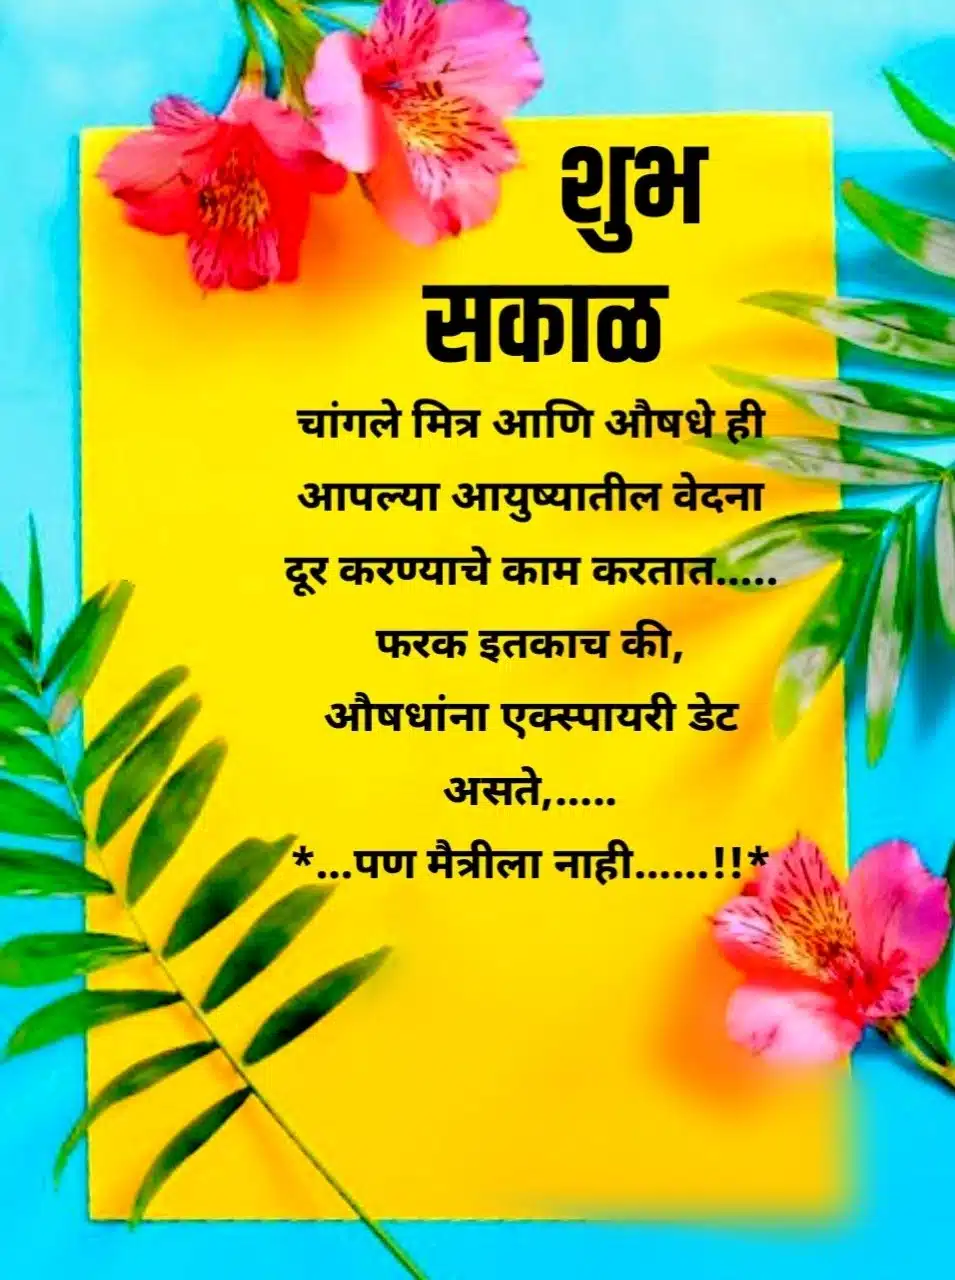 Good Morning Images In Marathi For Friends, Maitri Good Morning Images Marathi